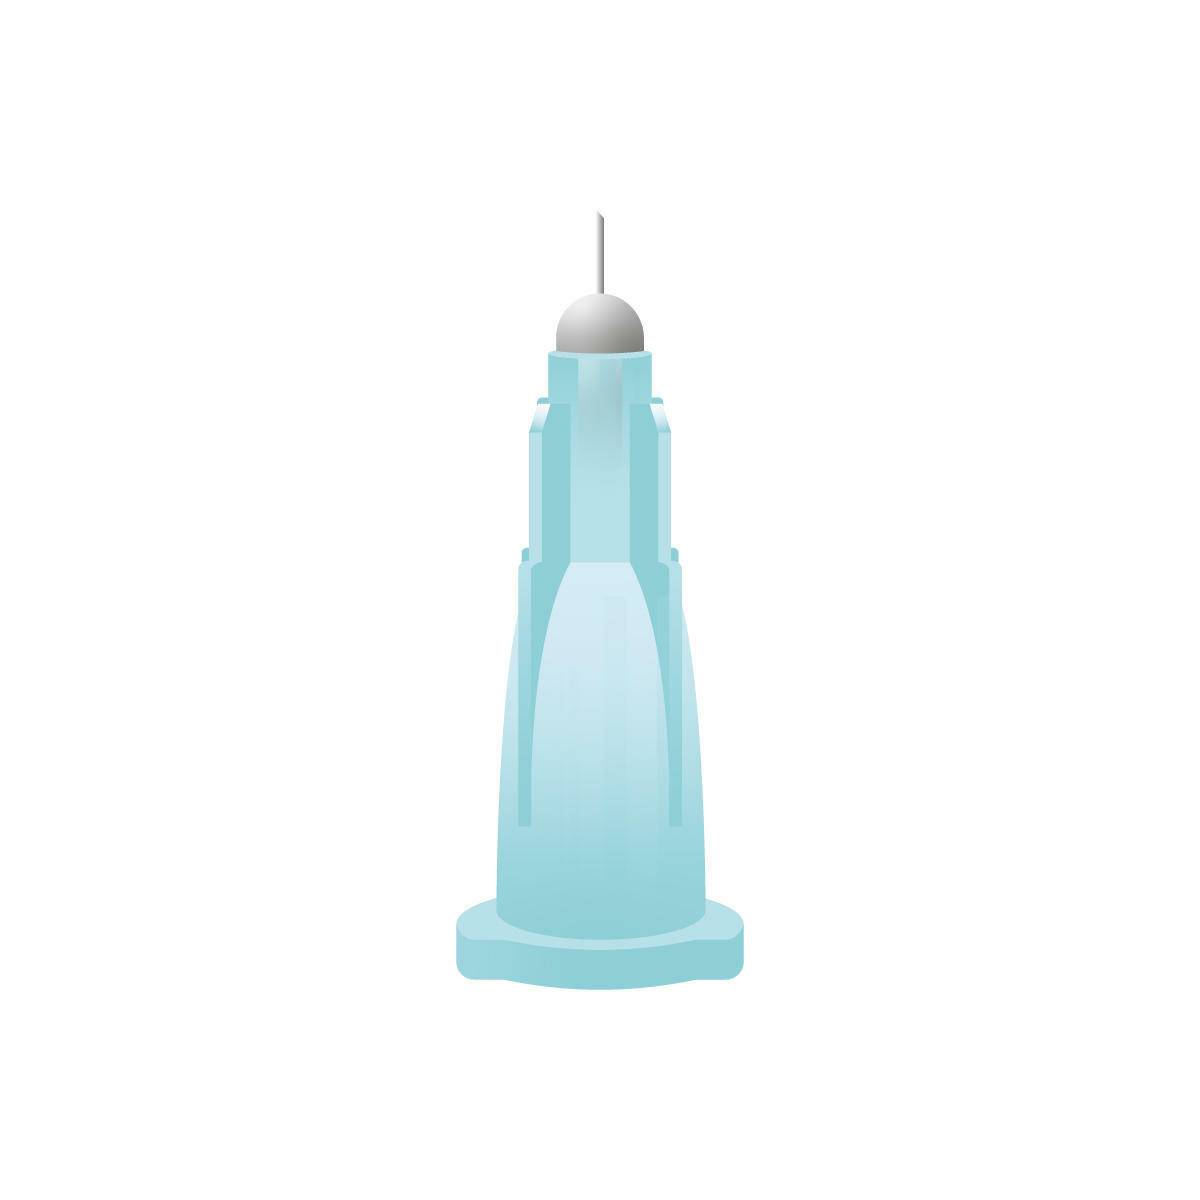 31g Light Blue 2.5mm Meso-relle Micro Needle for Microtherapy - UKMEDI